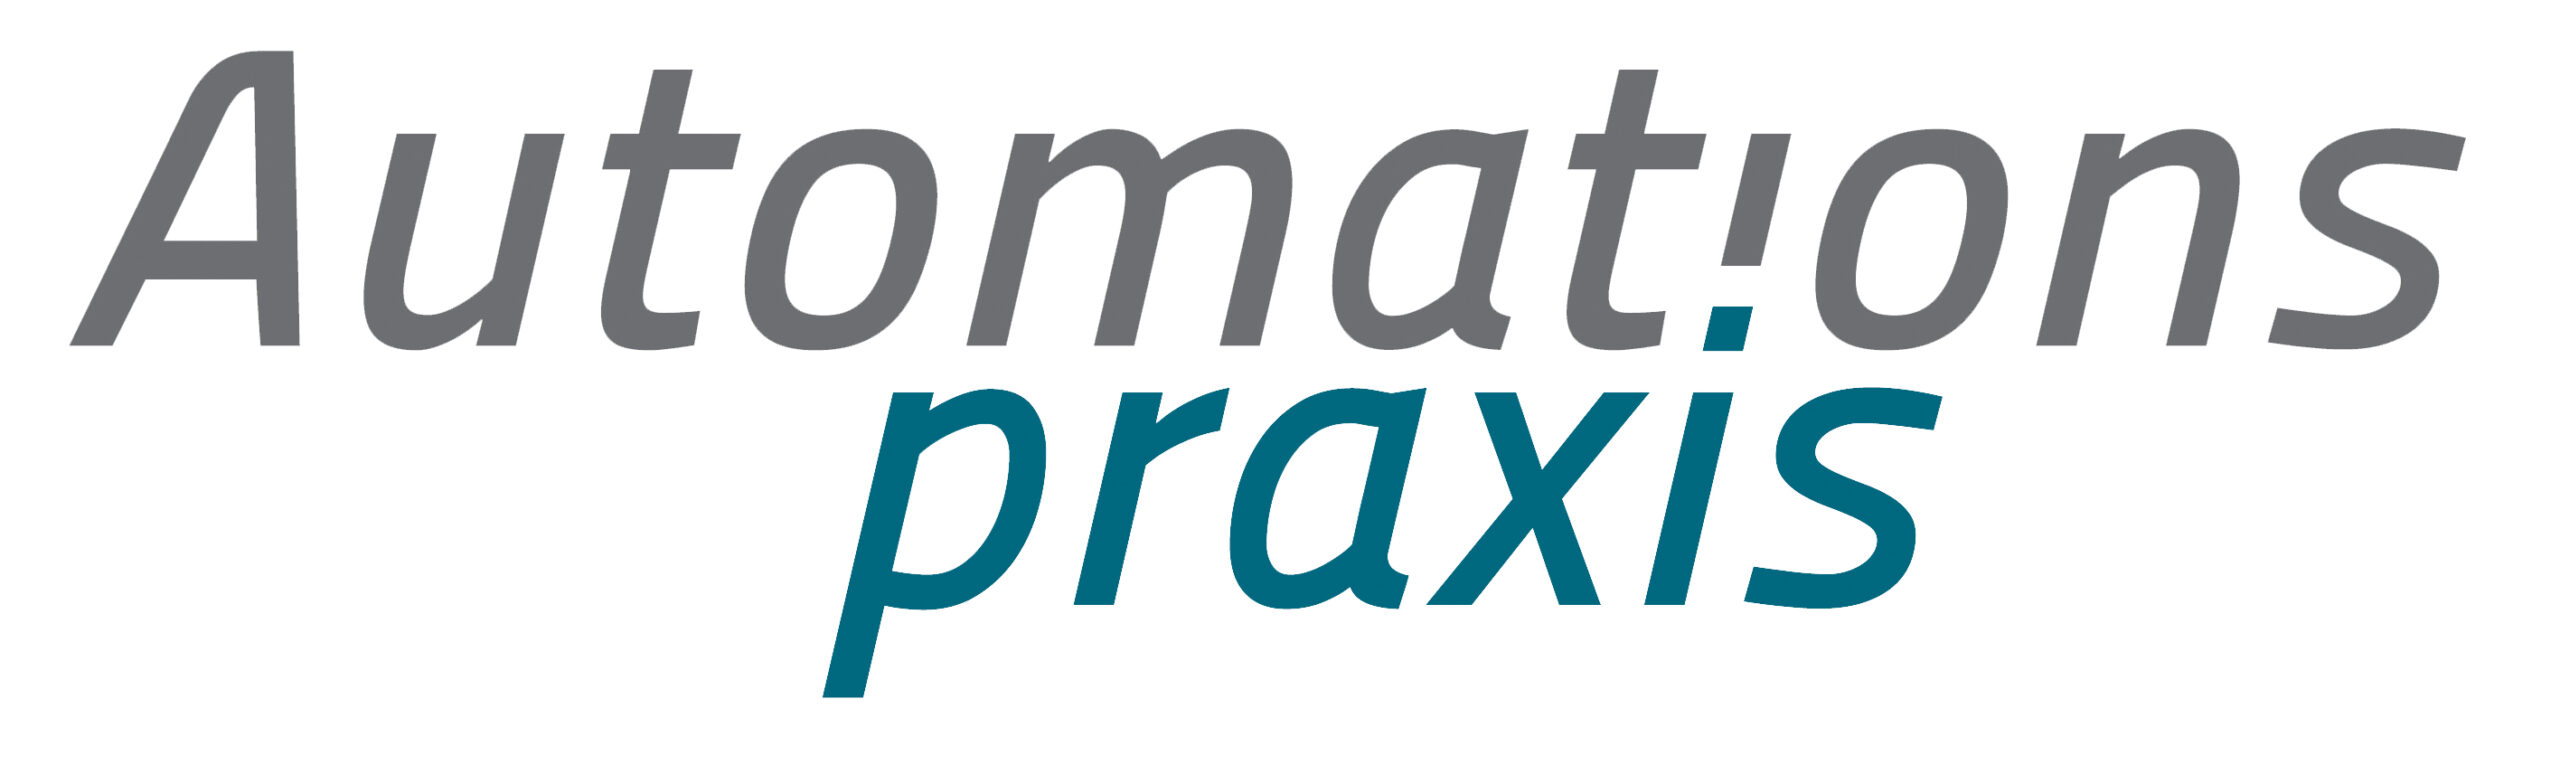 Automationspraxis